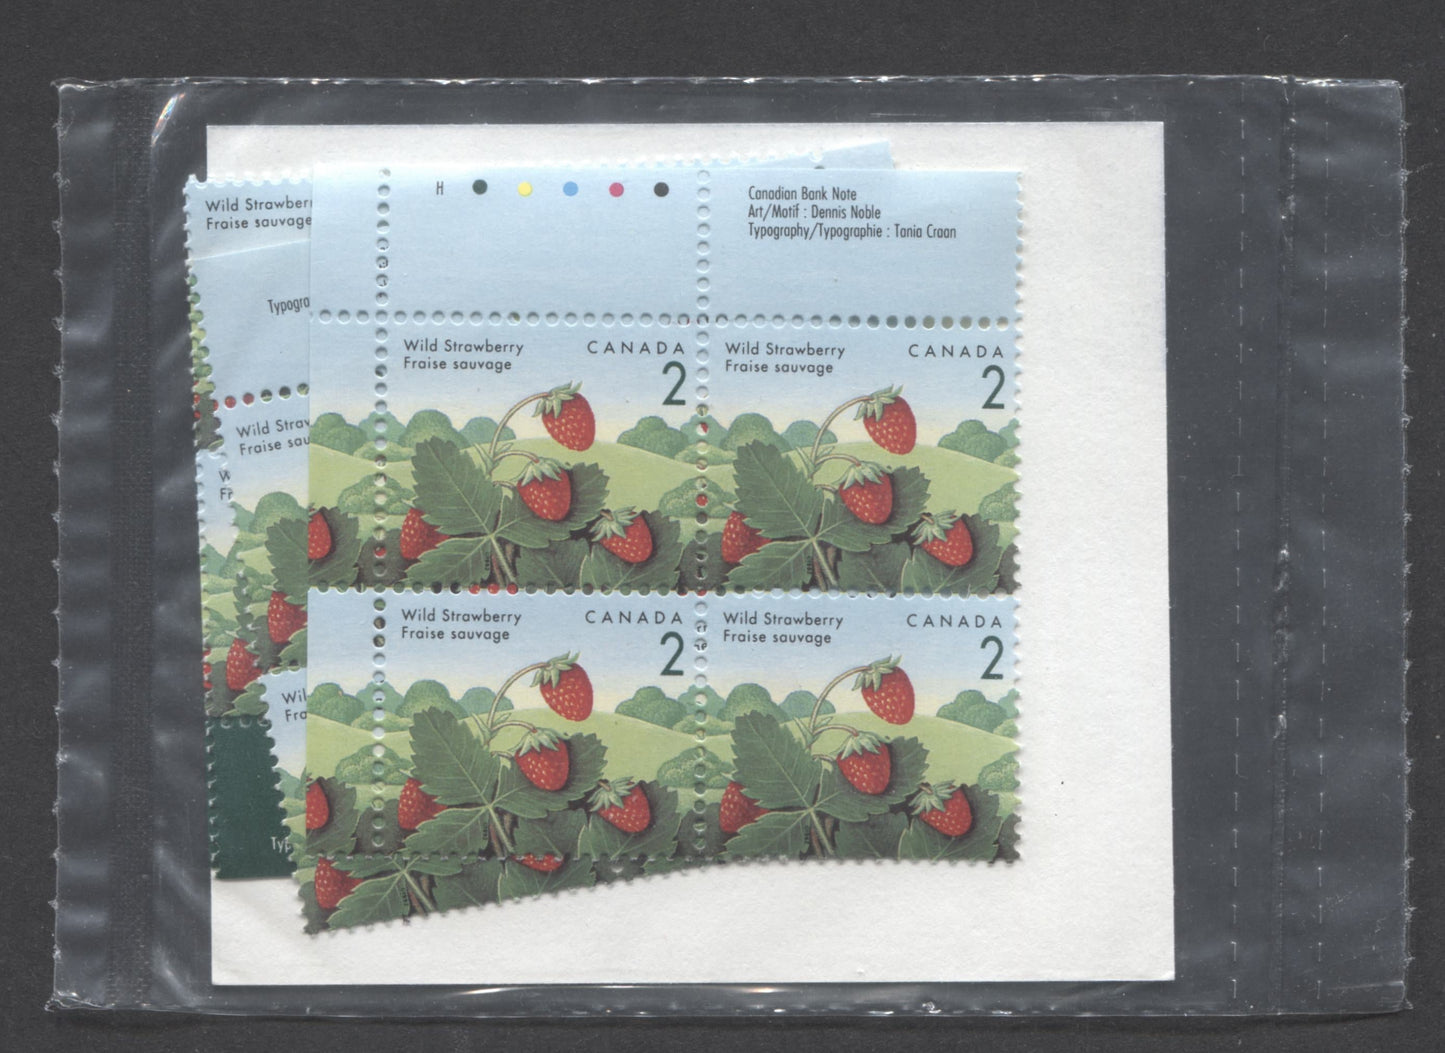 Lot 7 Canada #1350i 2c Multicoloured 1992 - 1998 Edible Berries Definitive Issue, Canada Post Sealed Pack of Inscription Blocks, CBN Printing On DF Harrison Paper, With HB Type 6B Insert Card, VFNH, Unitrade Cat. $14.5